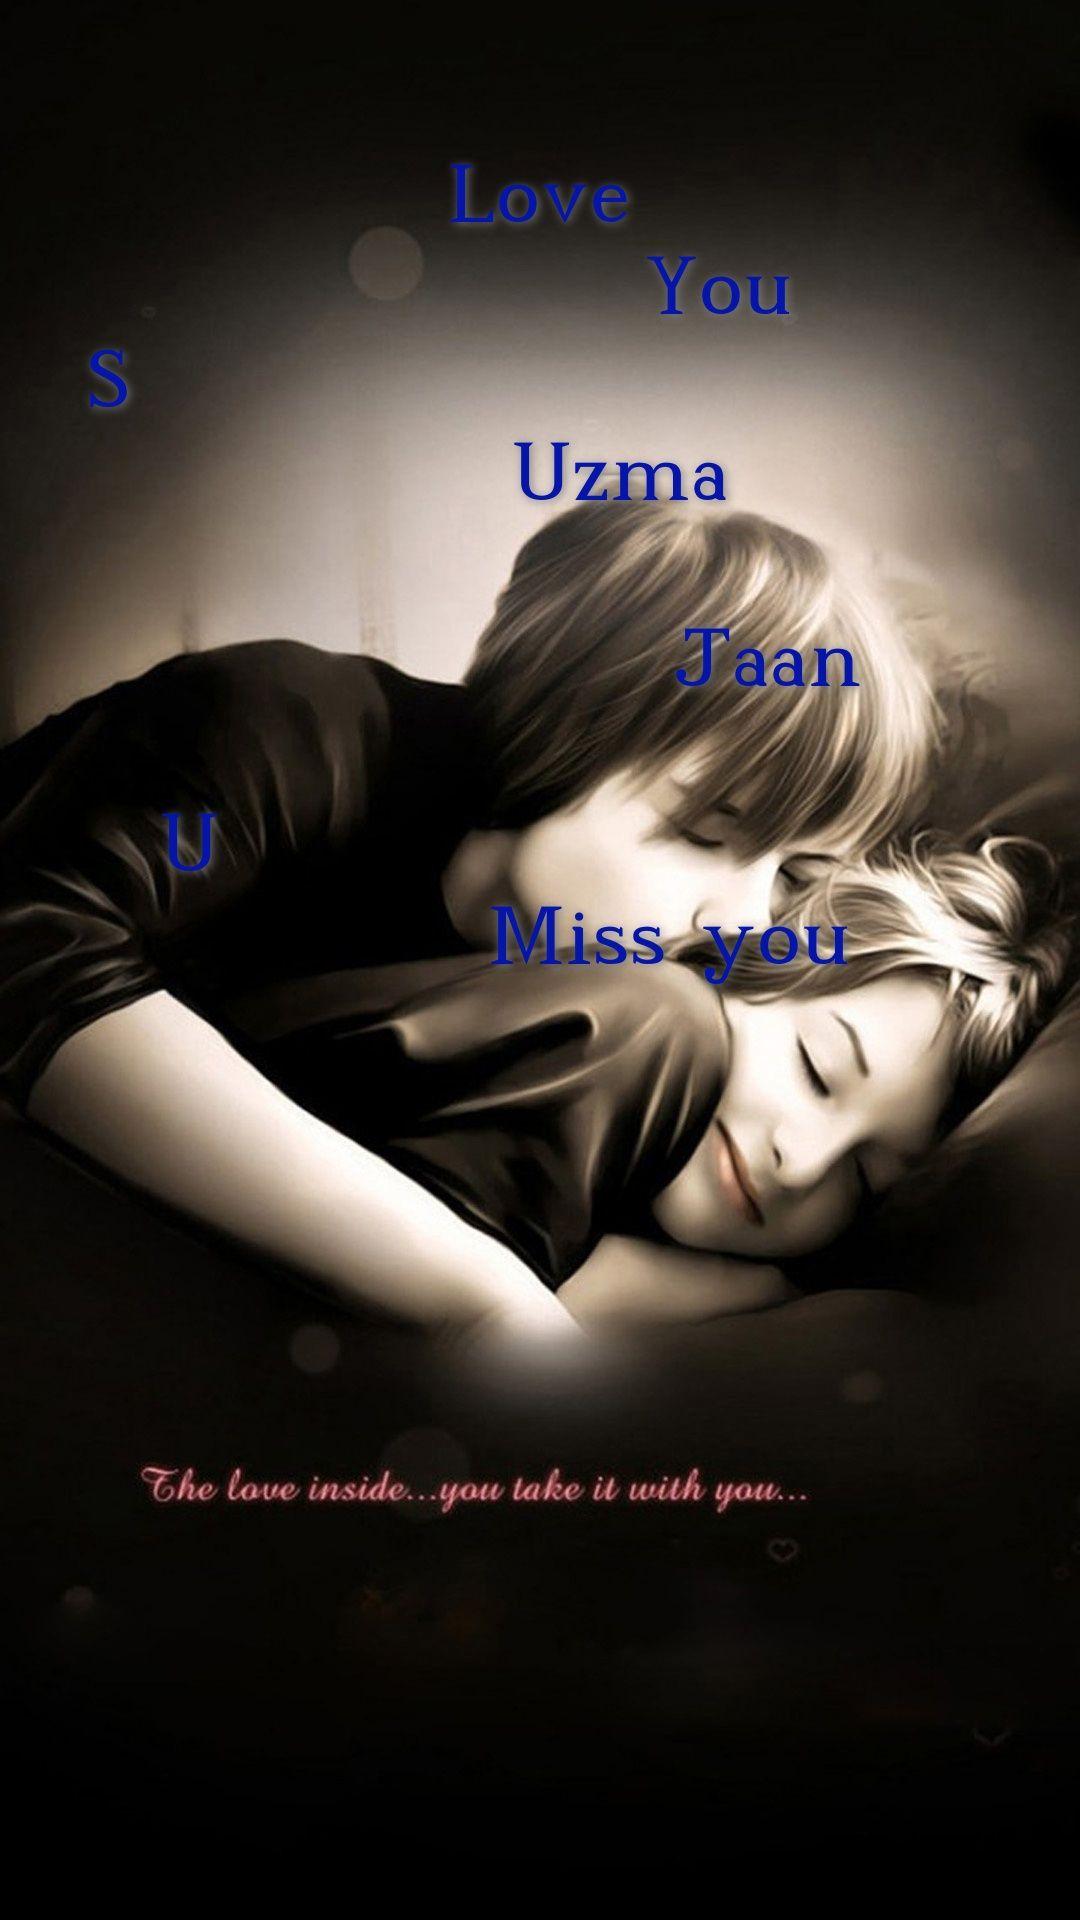 i love you jaan themes download